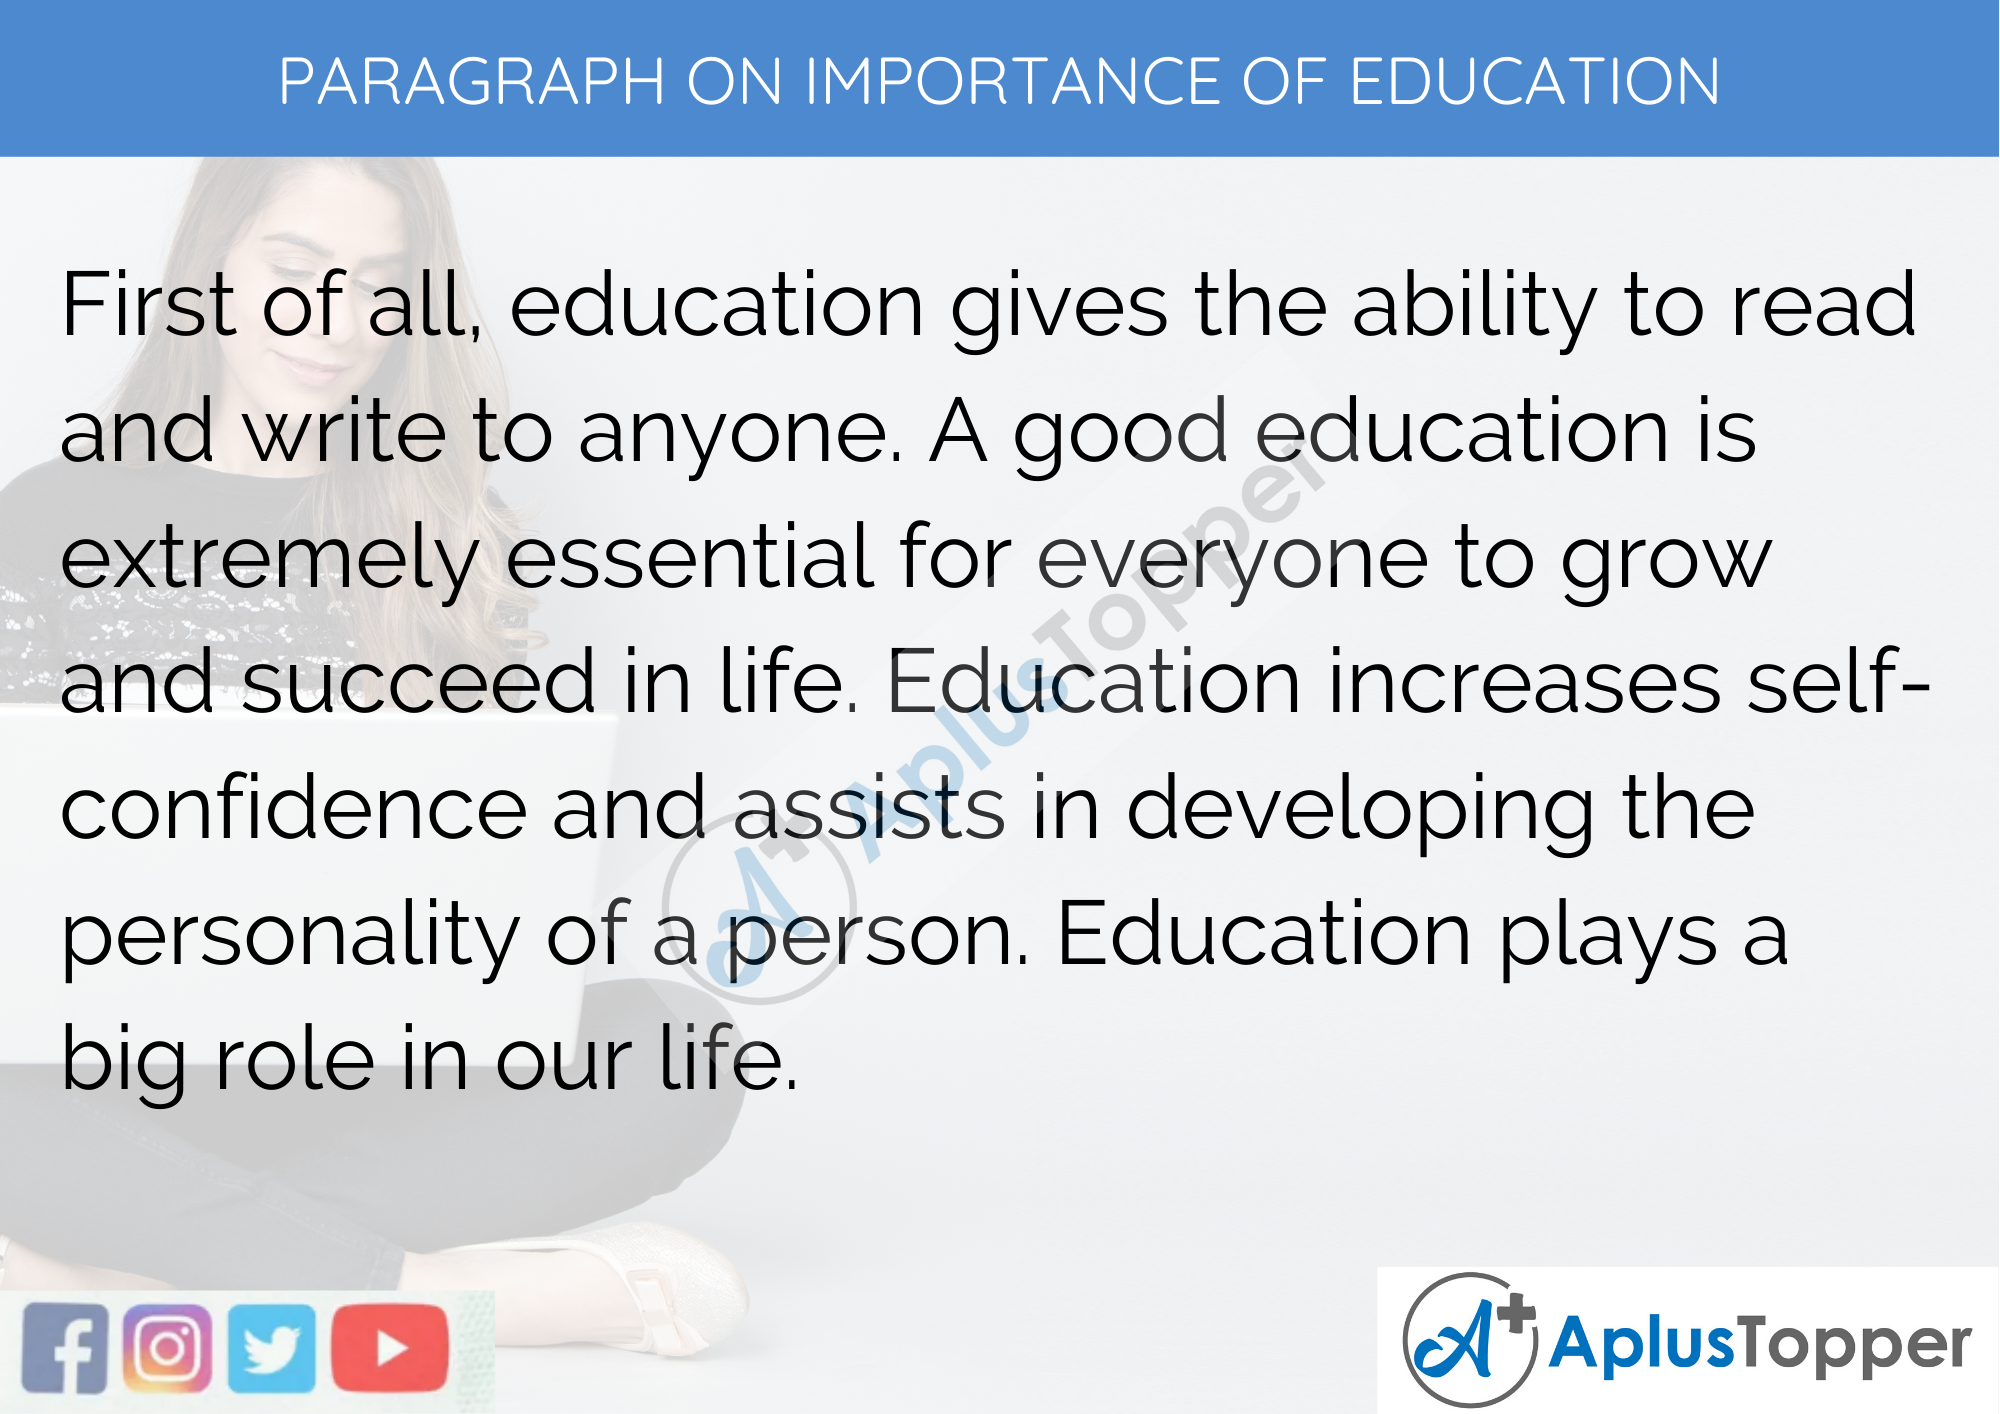 Paragraph on Importance of Education for kids